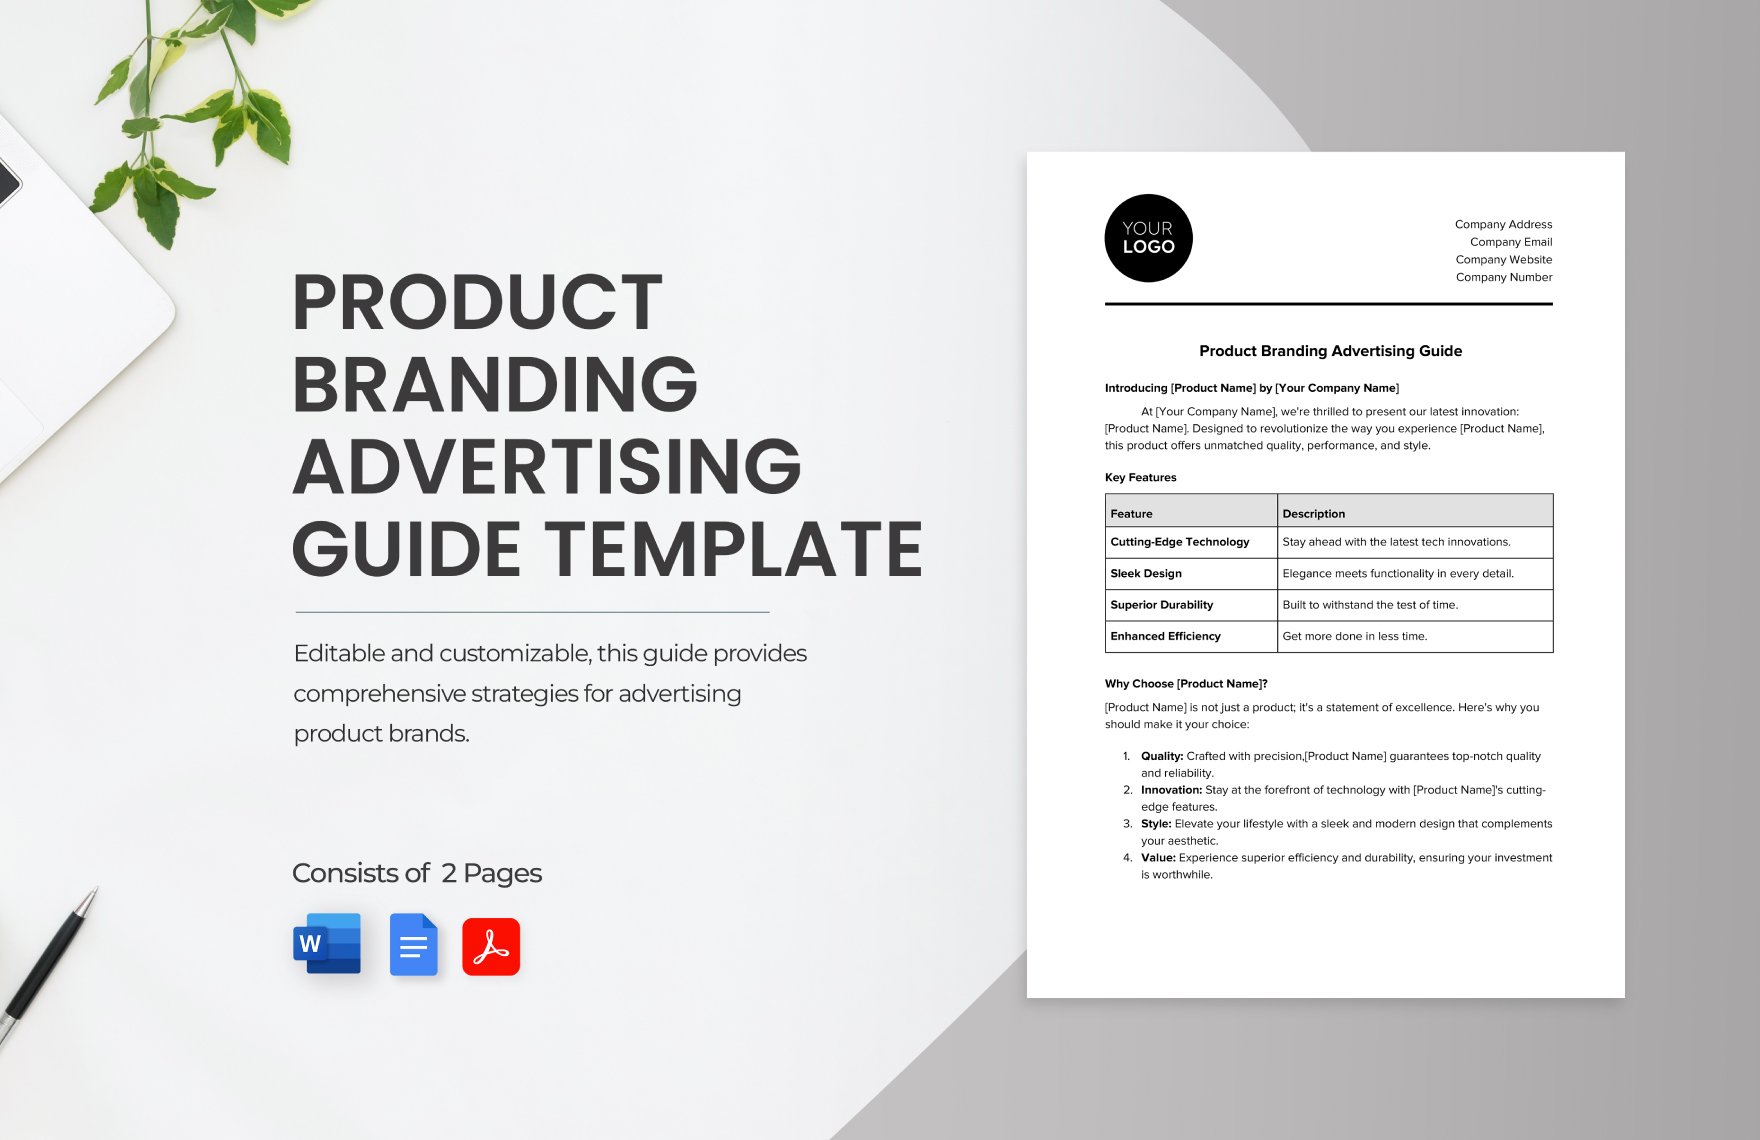 Product Branding Advertising Guide Template in Word, Google Docs, PDF